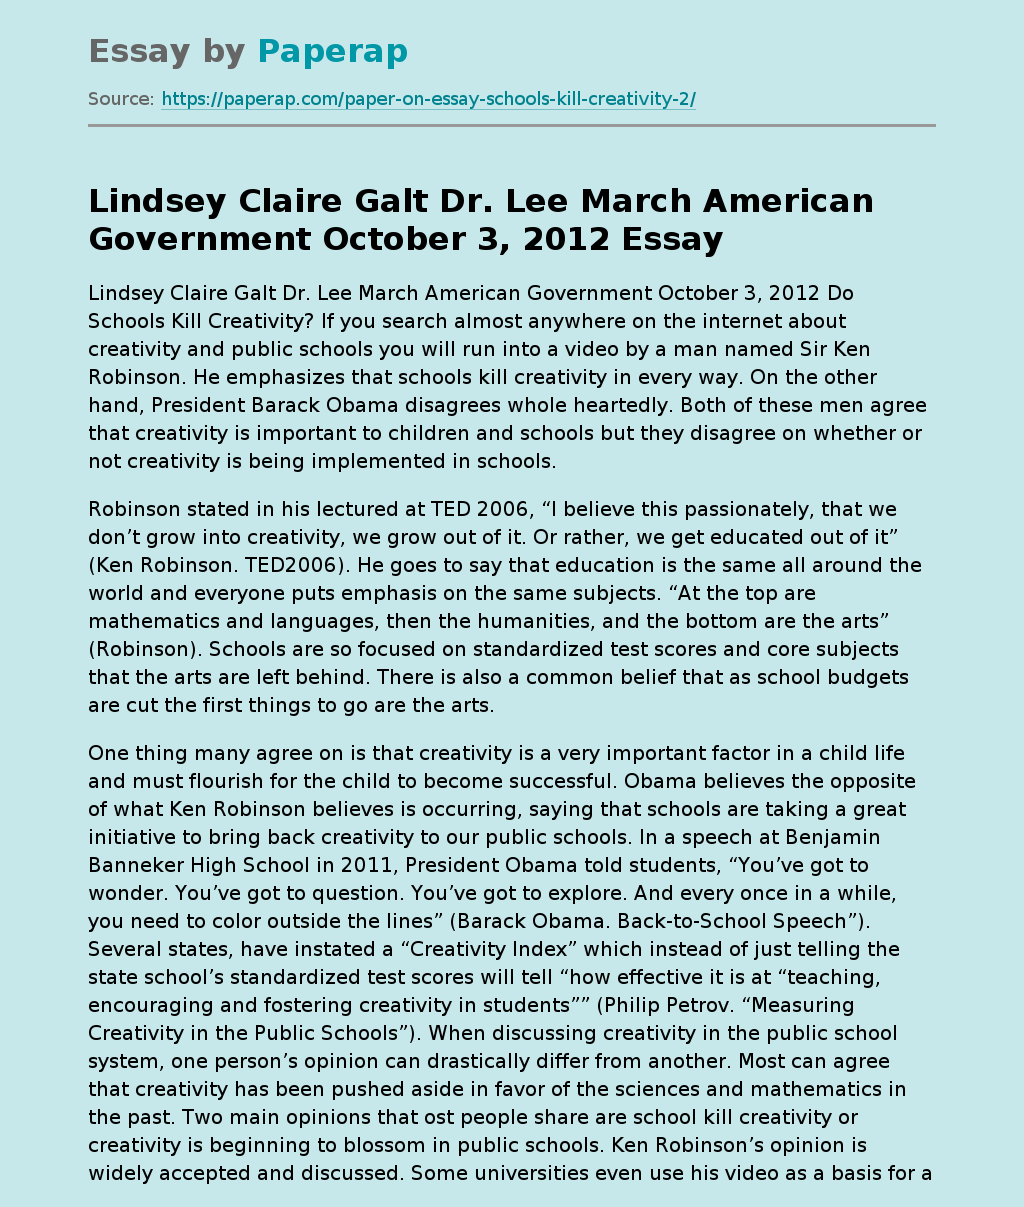 Lindsey Claire Galt Dr. Lee March American Government October 3, 2012